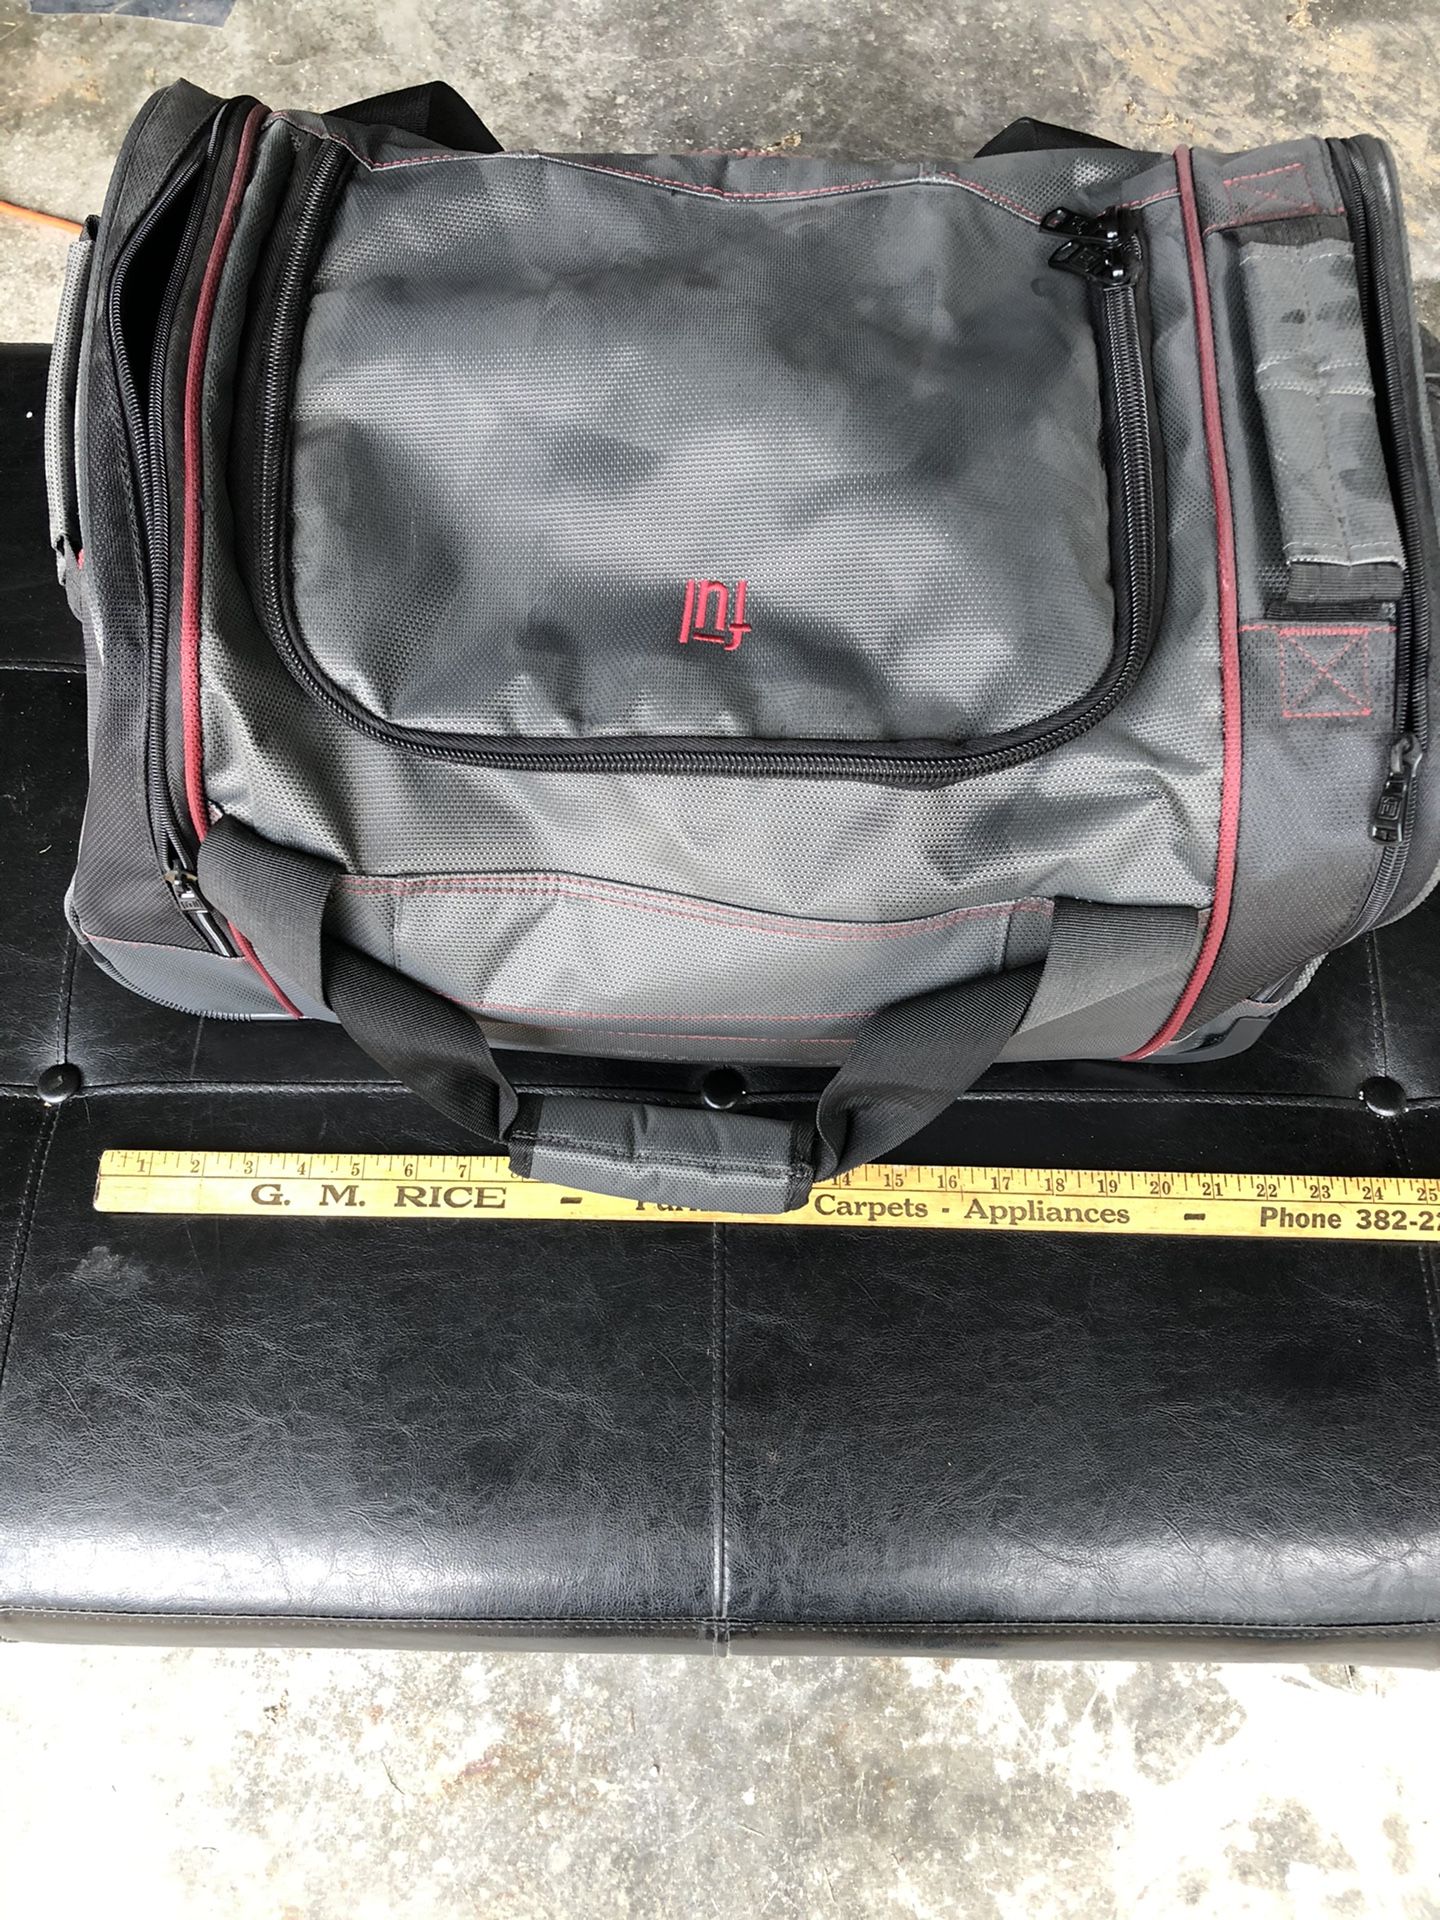 Roller bag “FUL” suitcase NEW luggage